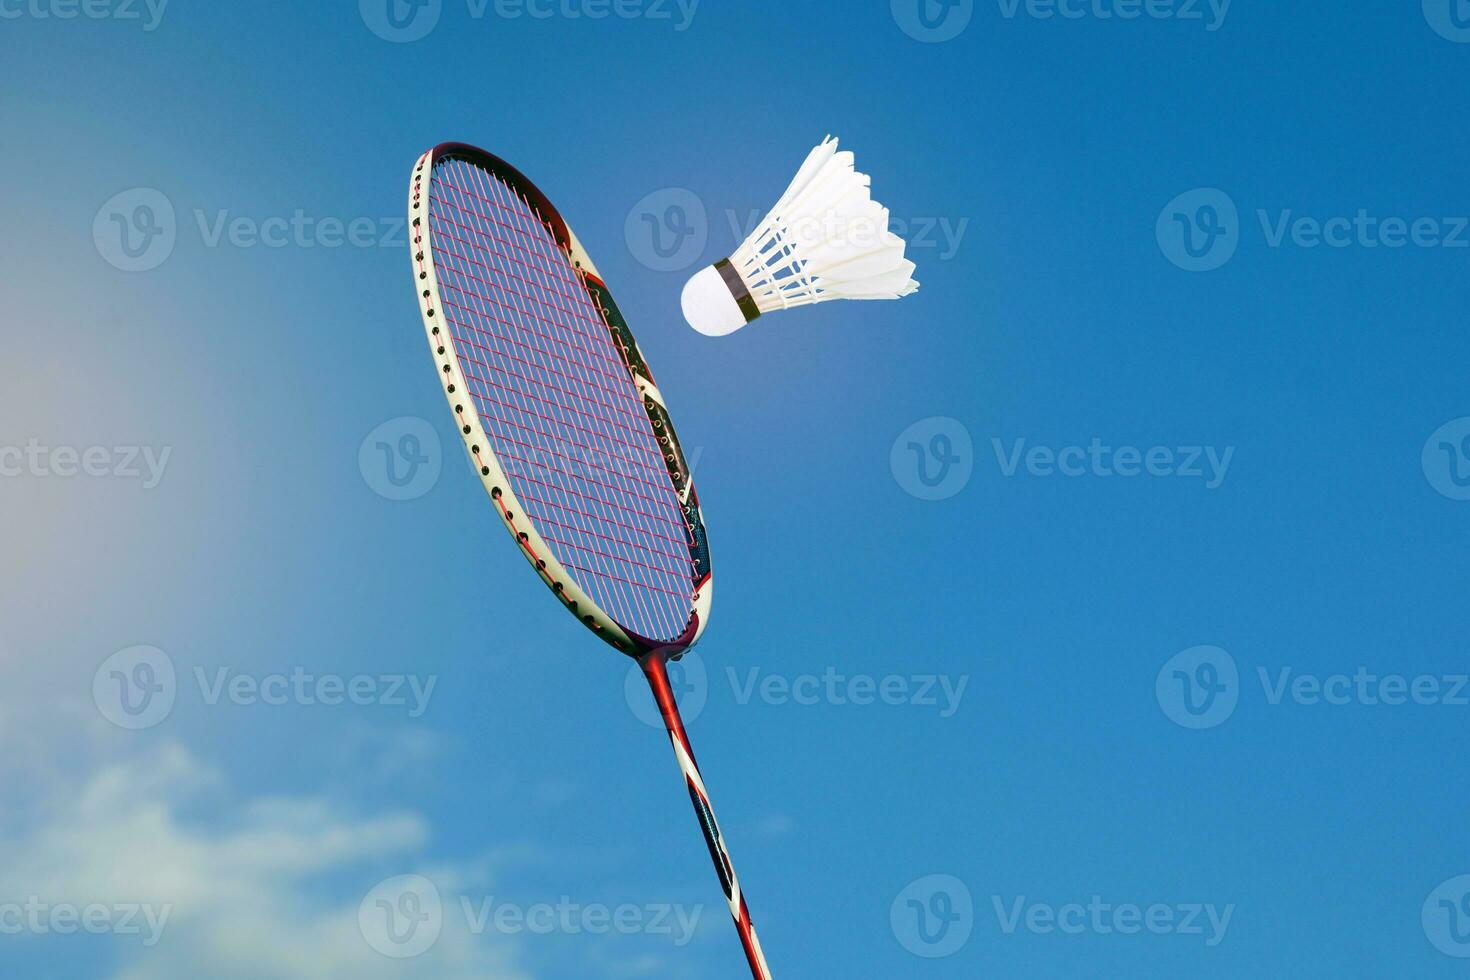 Badminton racket and white shuttlecock on cloudy sky background. Concept playing badminton outdoors. photo